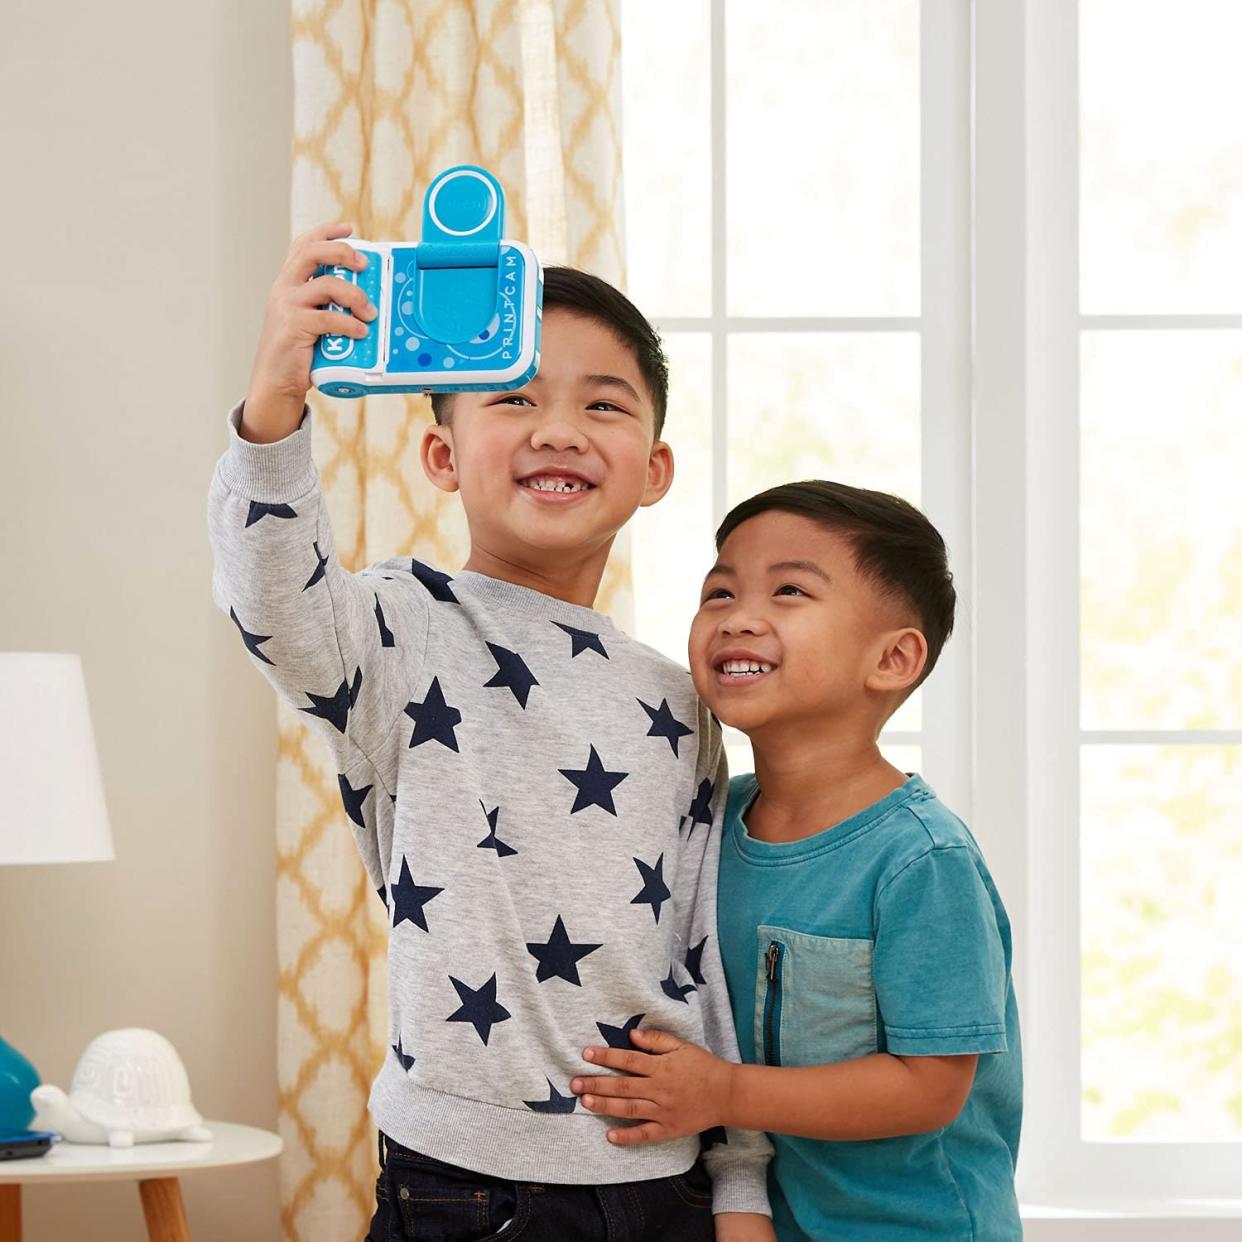 The flip-up lens makes selfies easy as pie. (Photo: VTech)